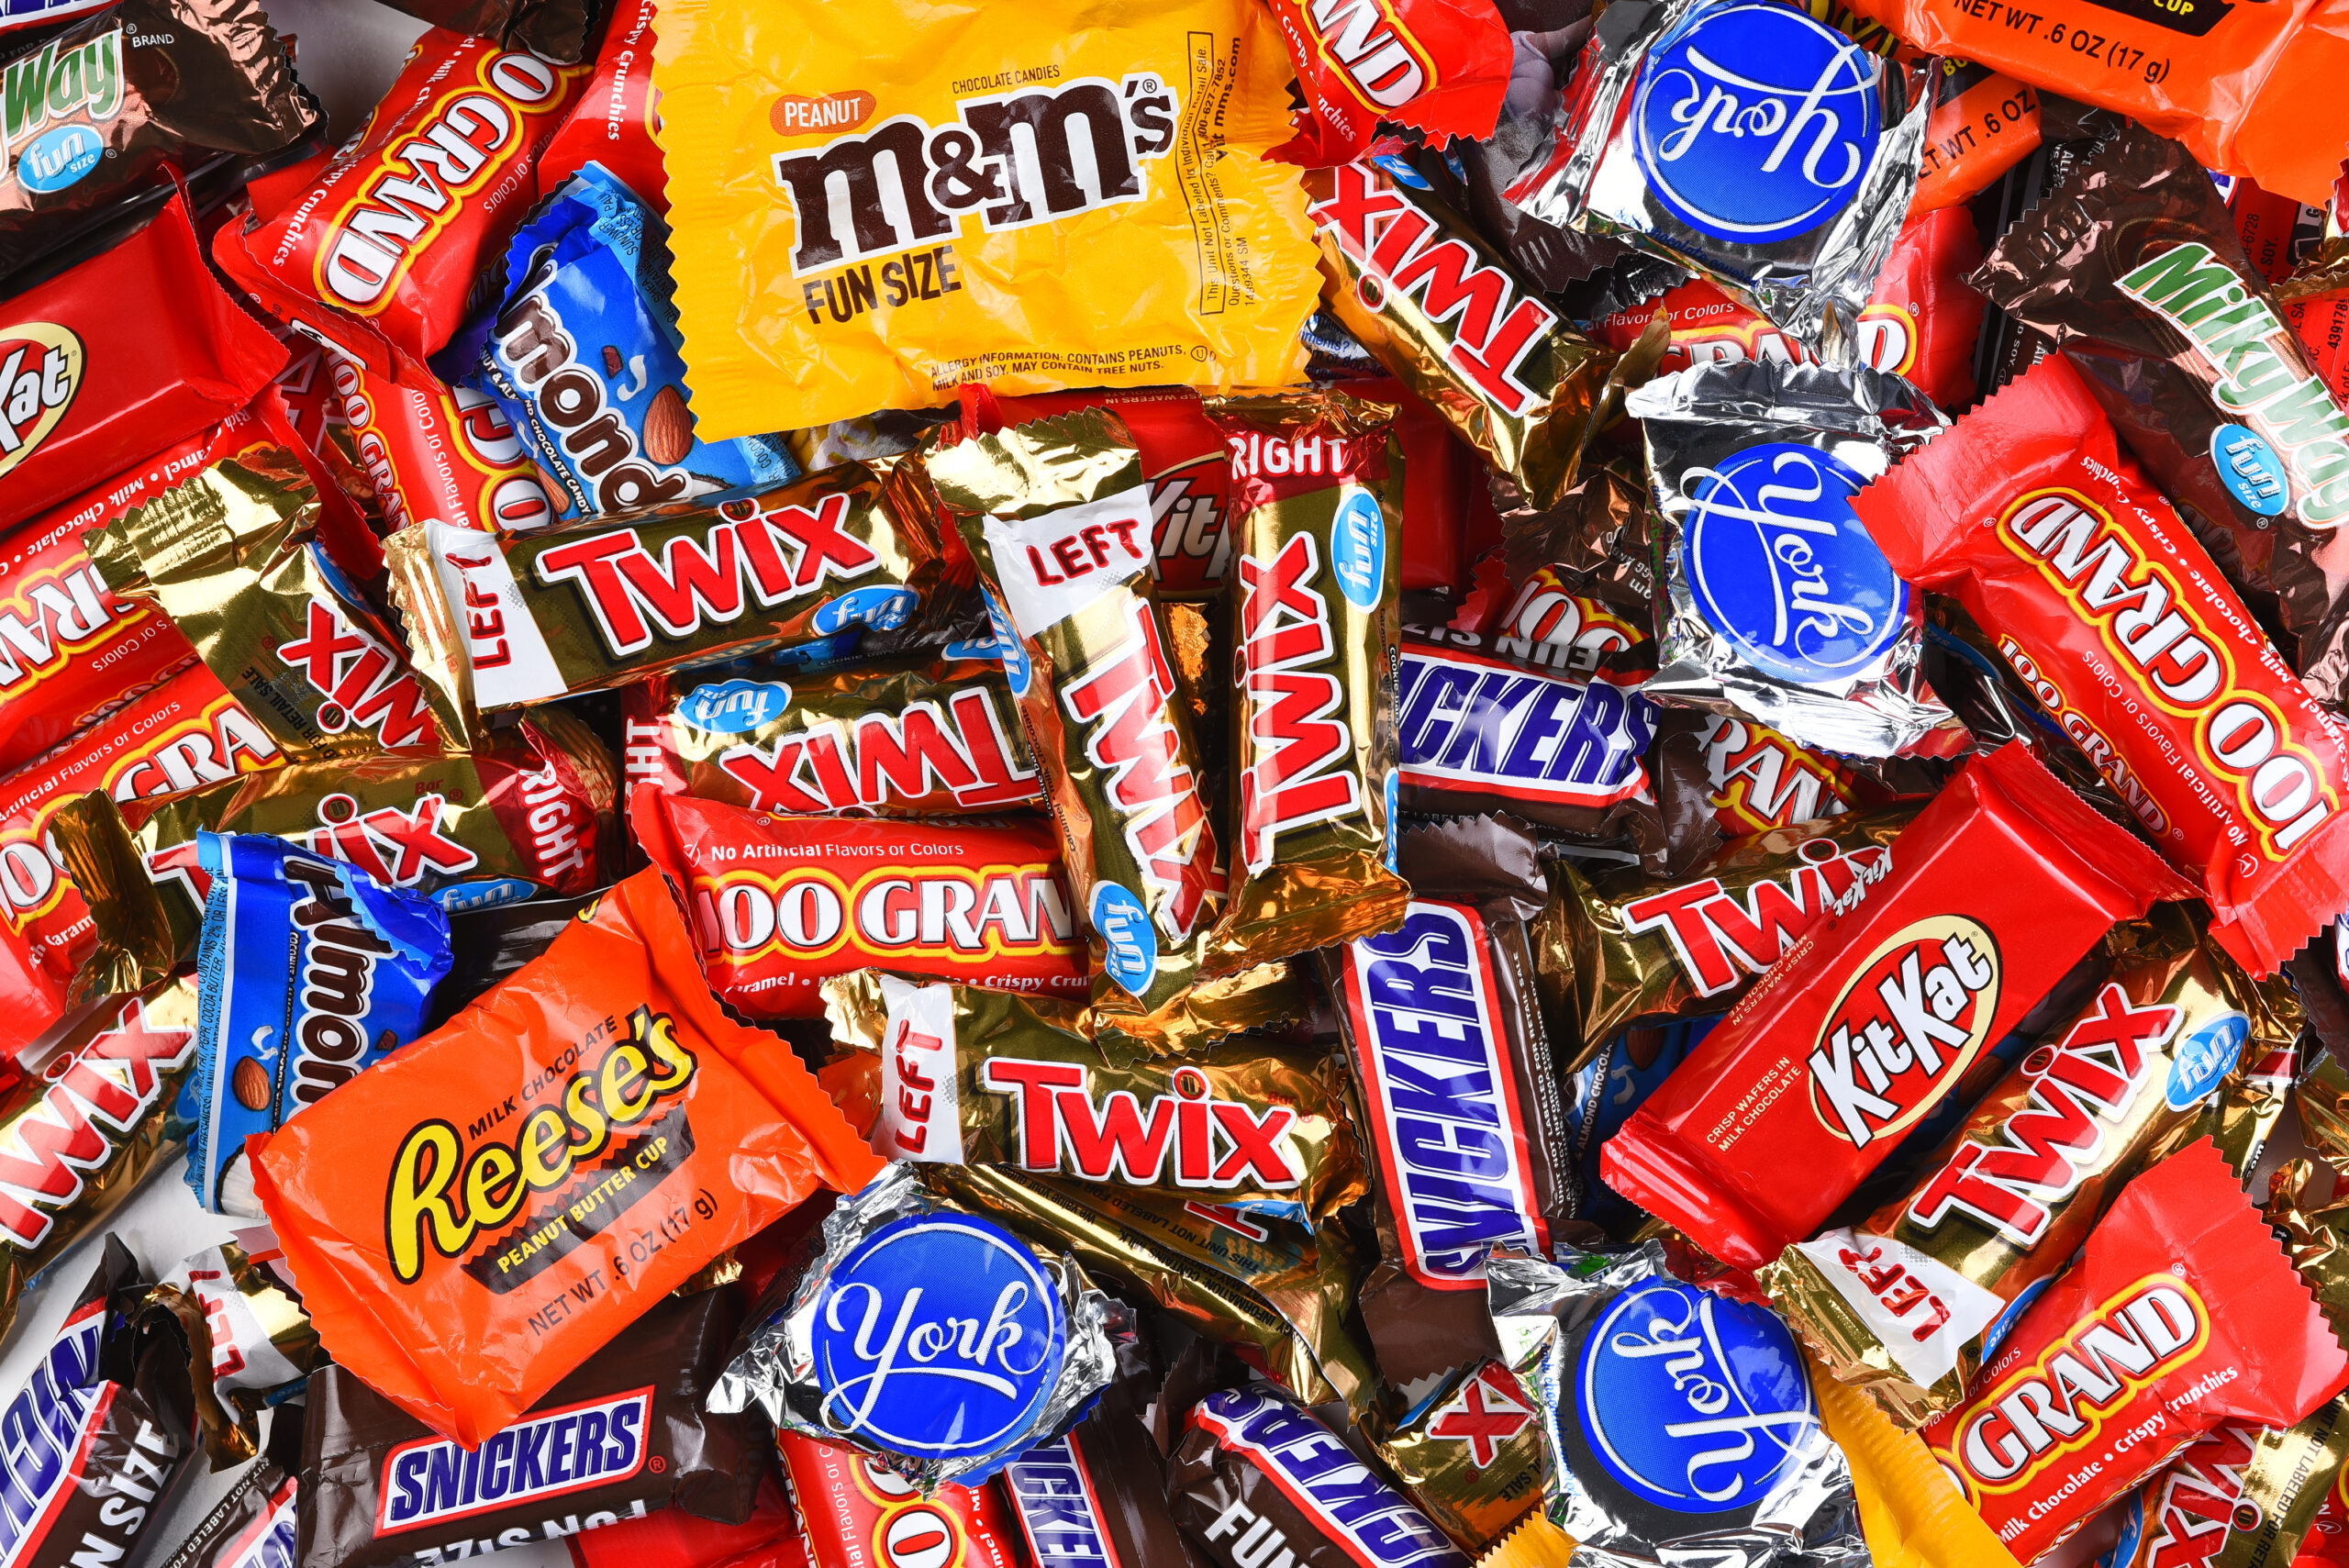 IRVINE, CALIFORNIA - 23 SEPT 2021: A large assortment of fun size candy bars for Halloween.